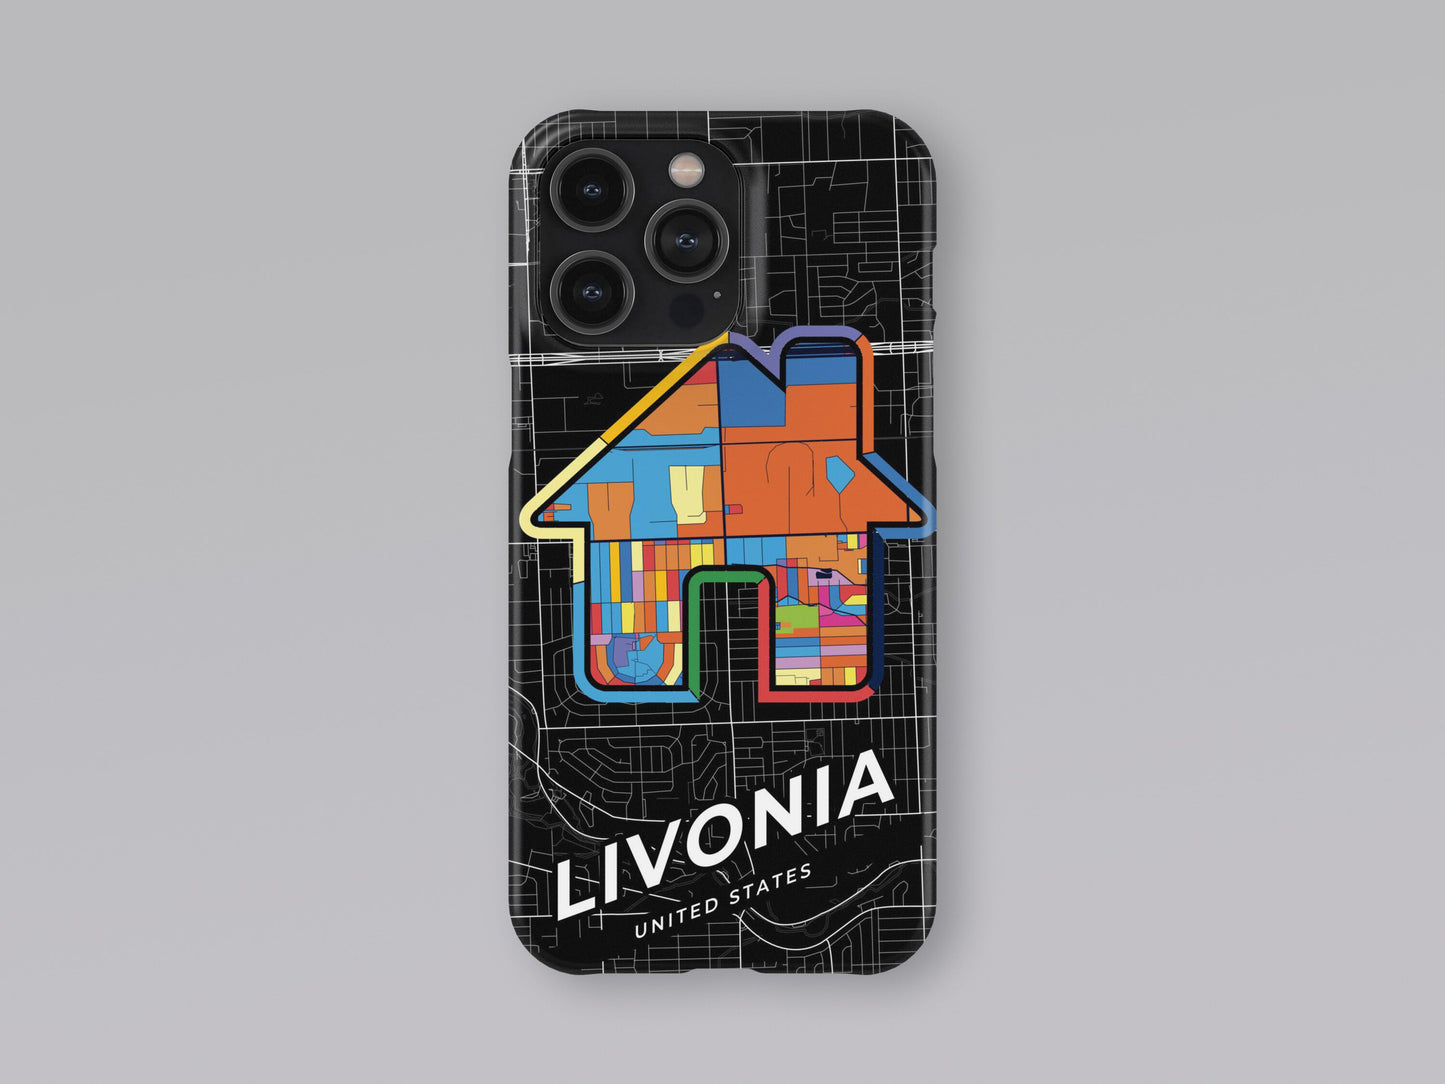 Livonia Michigan slim phone case with colorful icon. Birthday, wedding or housewarming gift. Couple match cases. 3